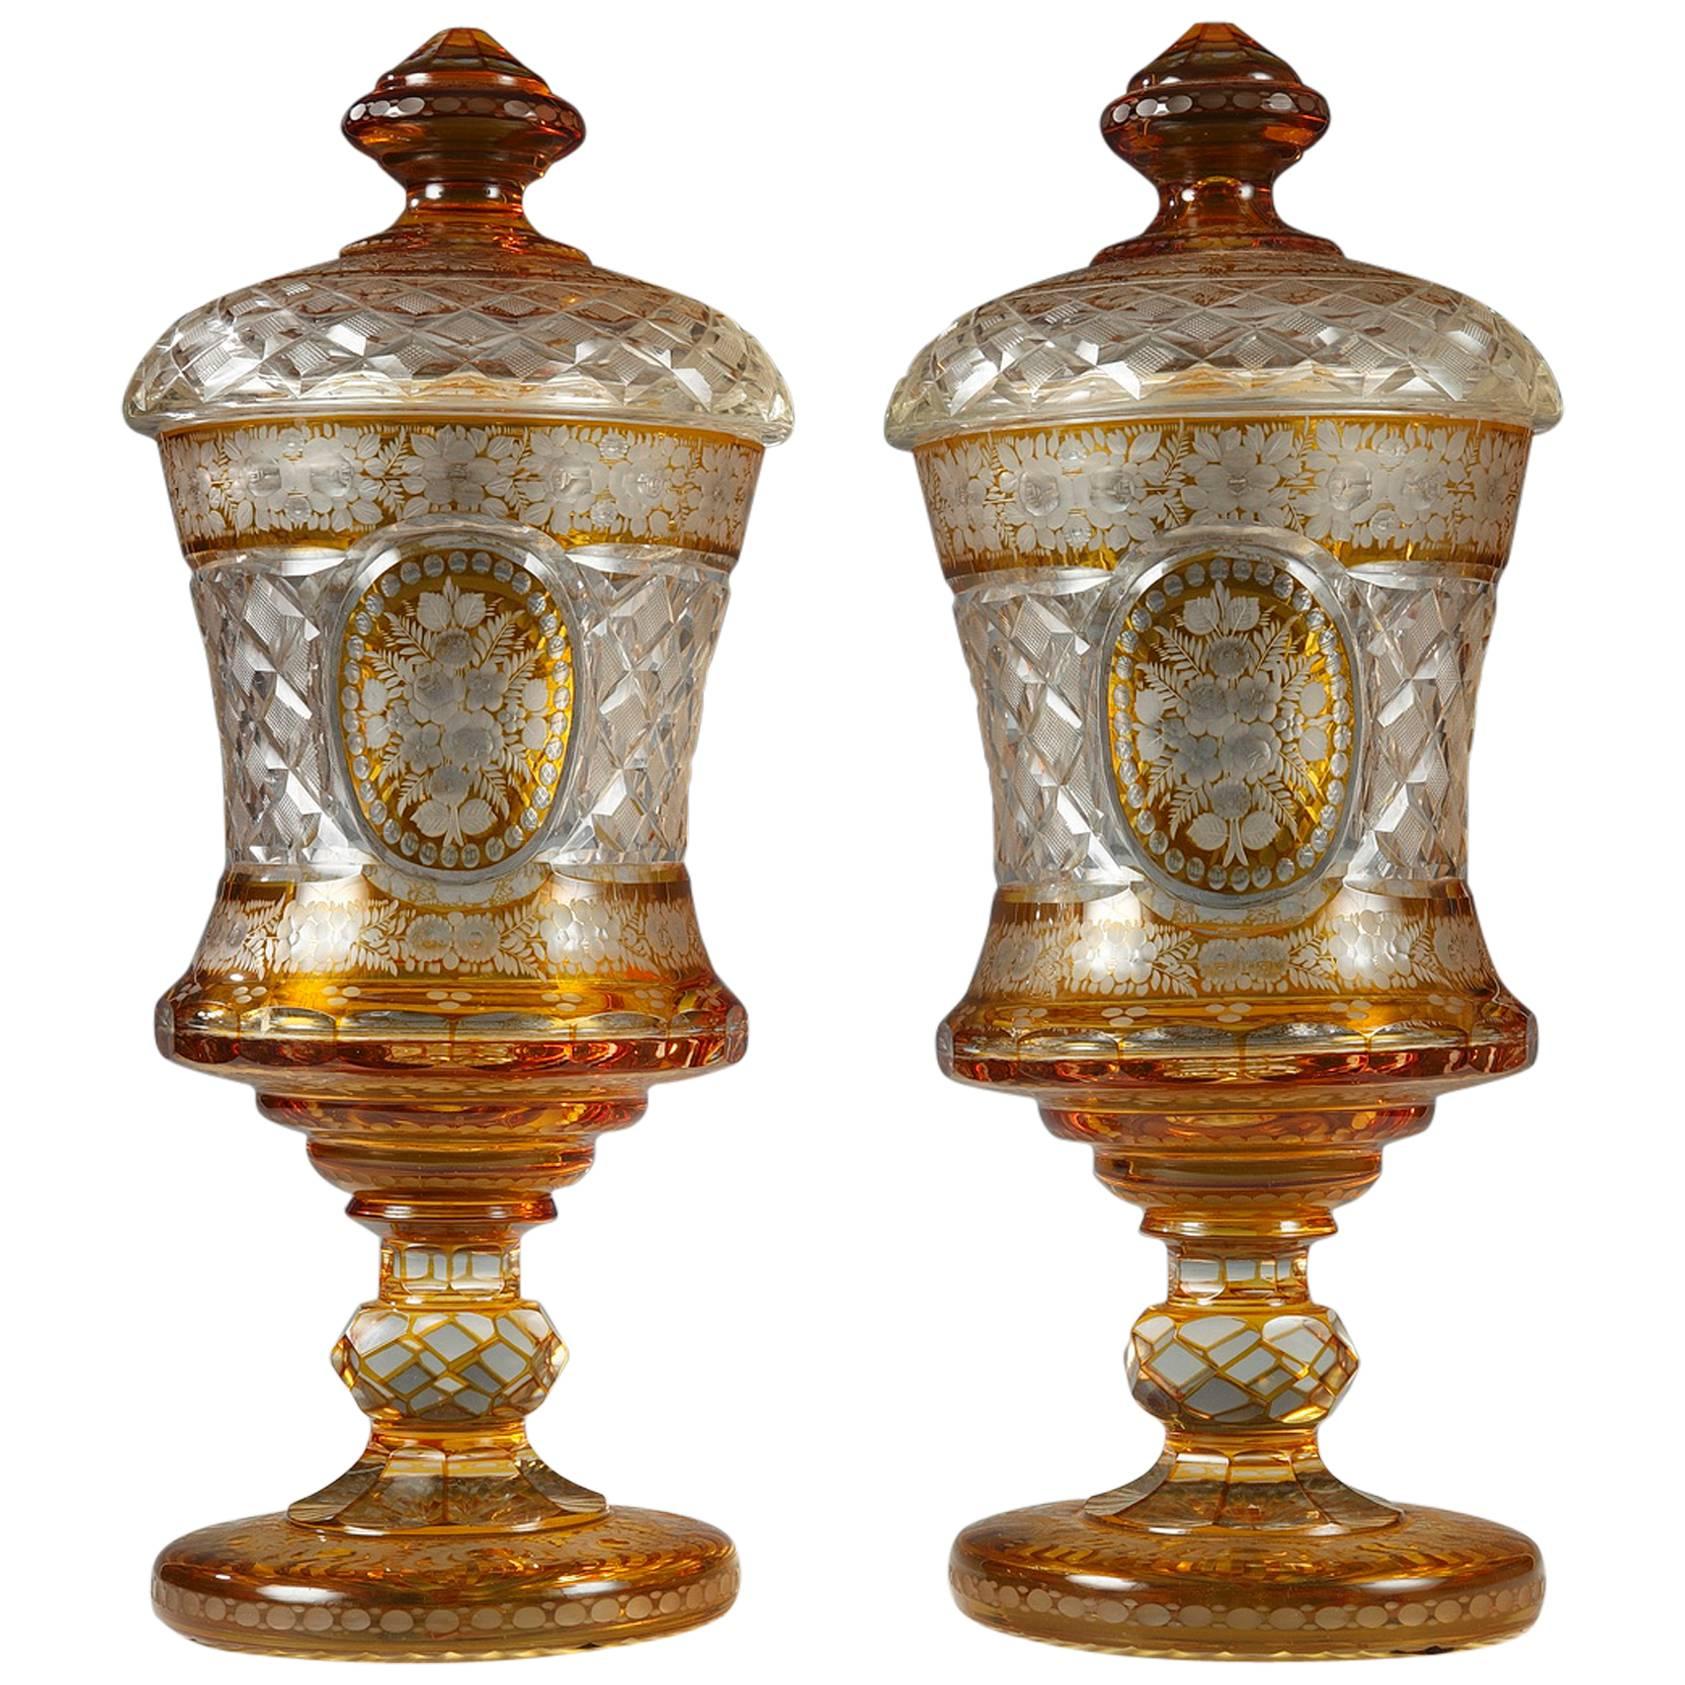 20th Century Pair of Sweetmeat Vases, Bohemian Crystal Glassware For Sale